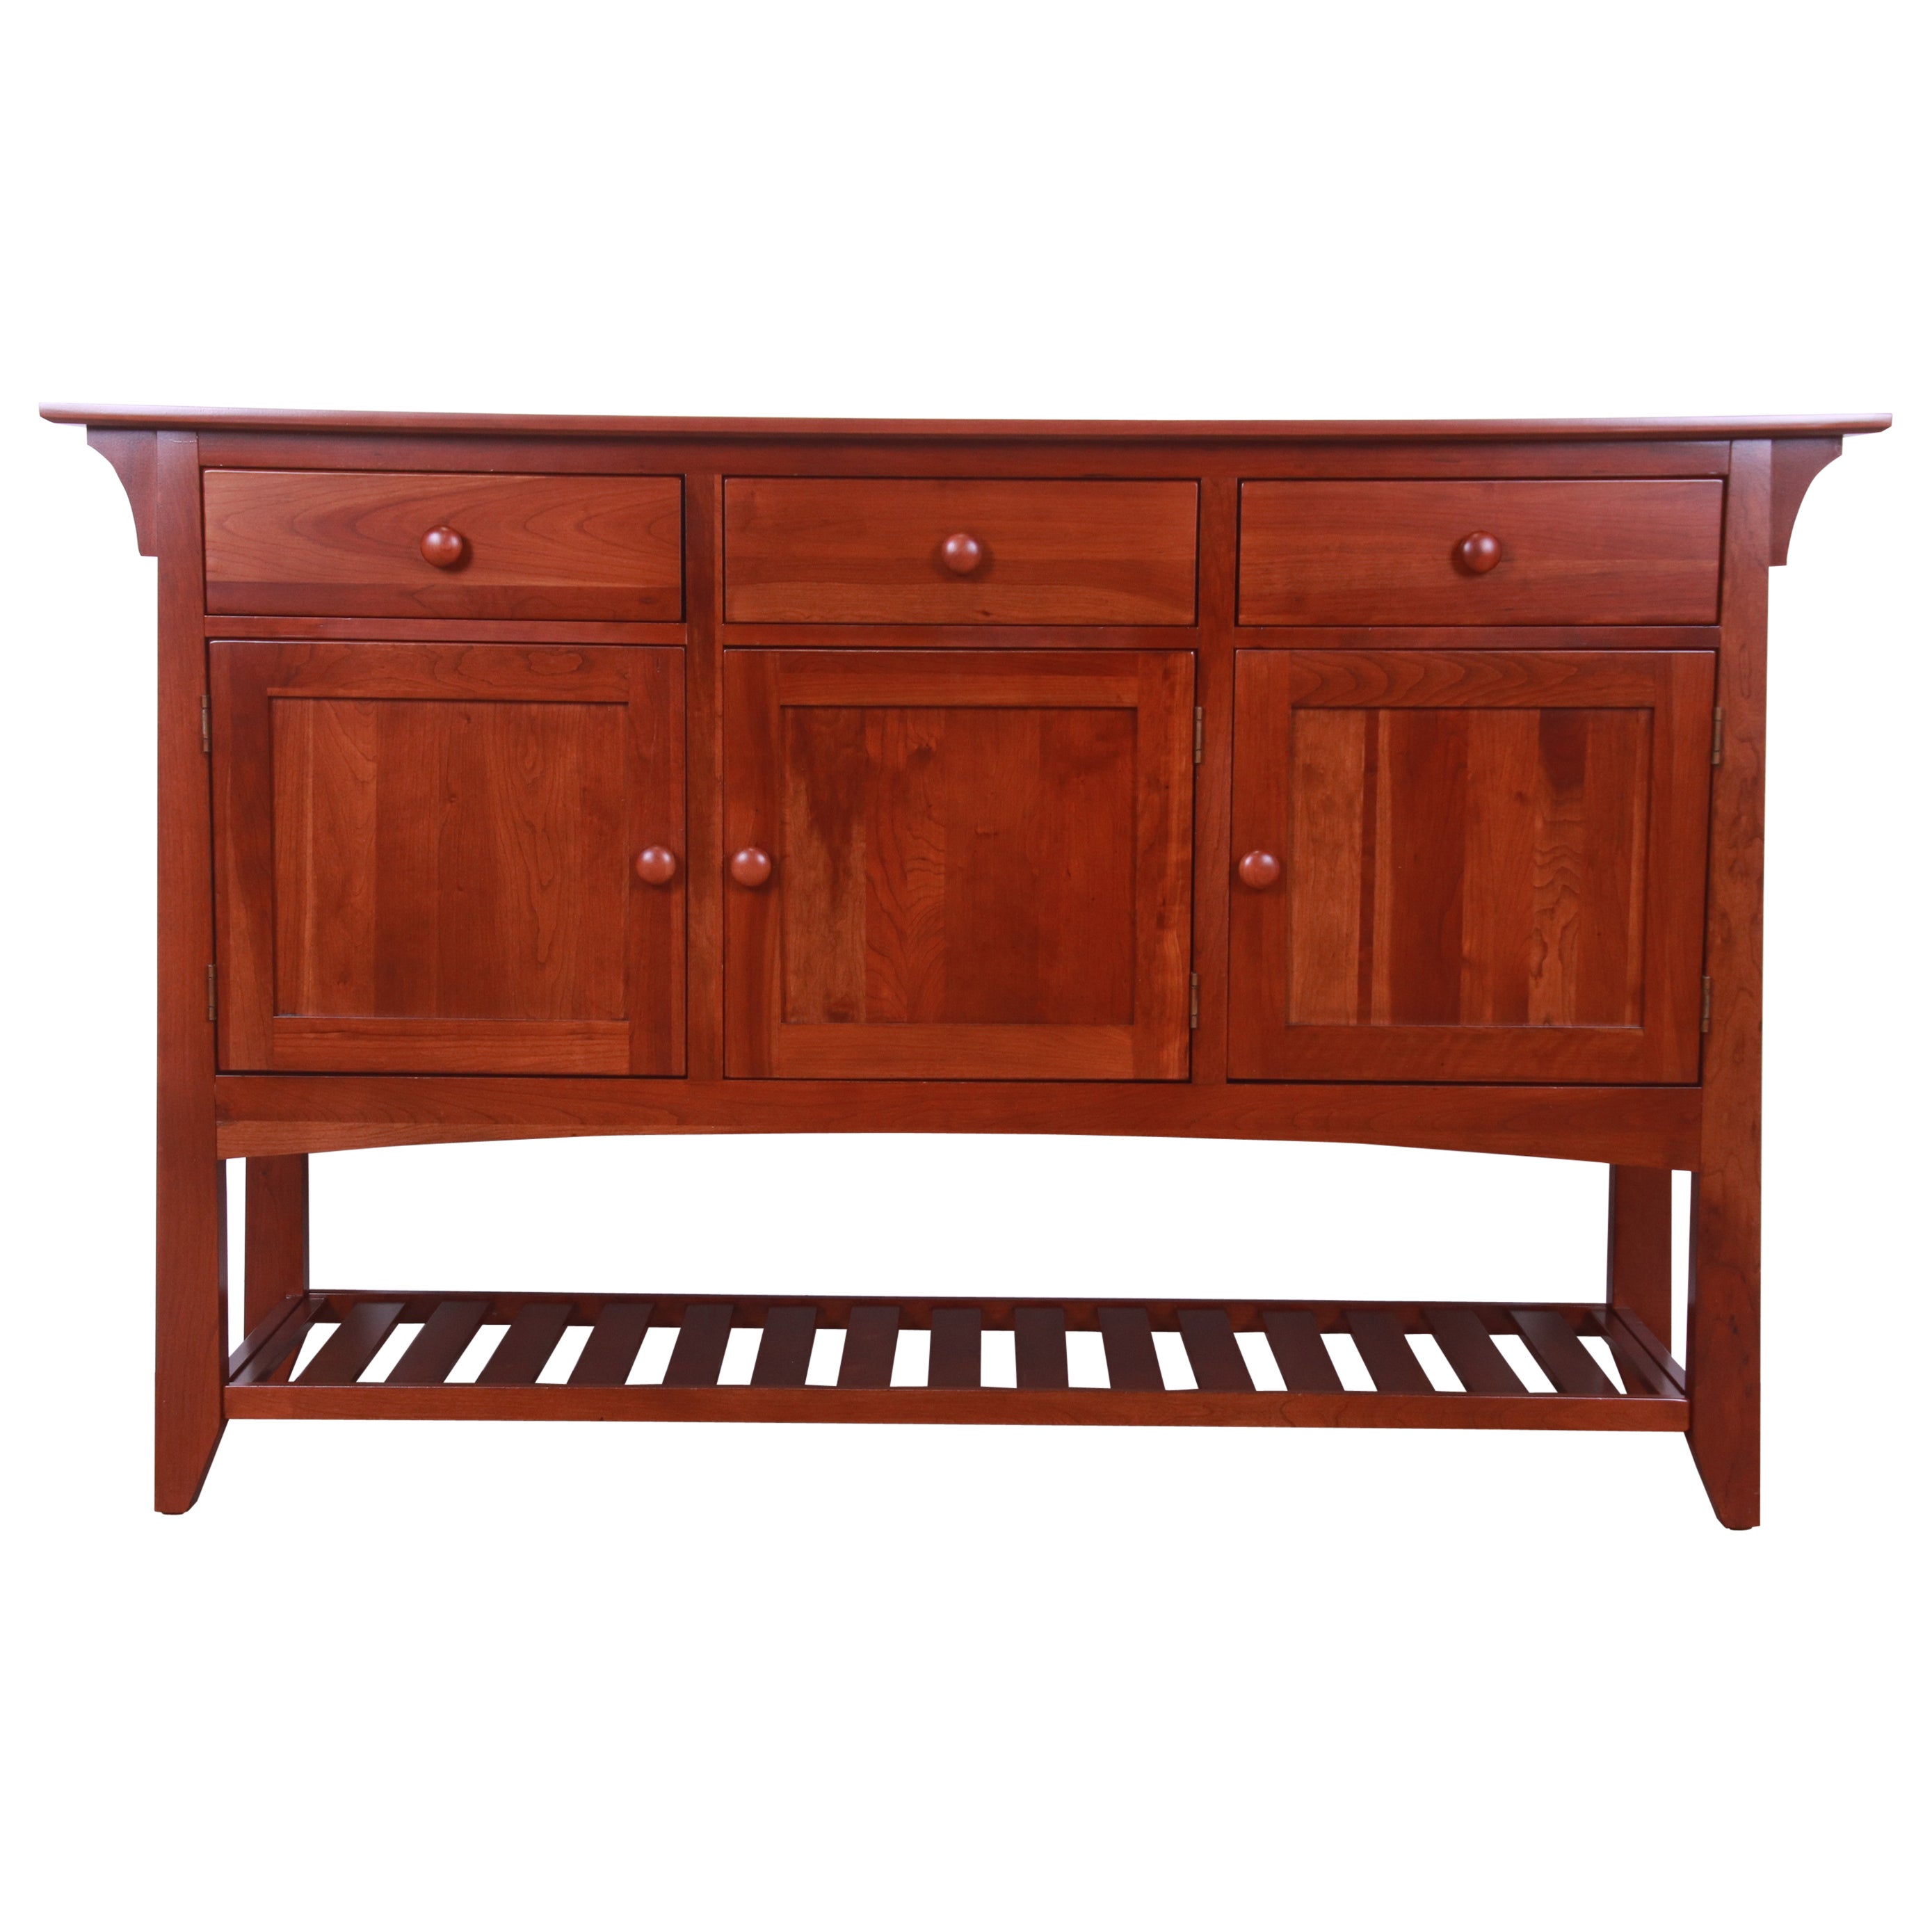 Ethan Allen Arts & Crafts Cherry Wood Sideboard or Bar Cabinet, Newly Refinished